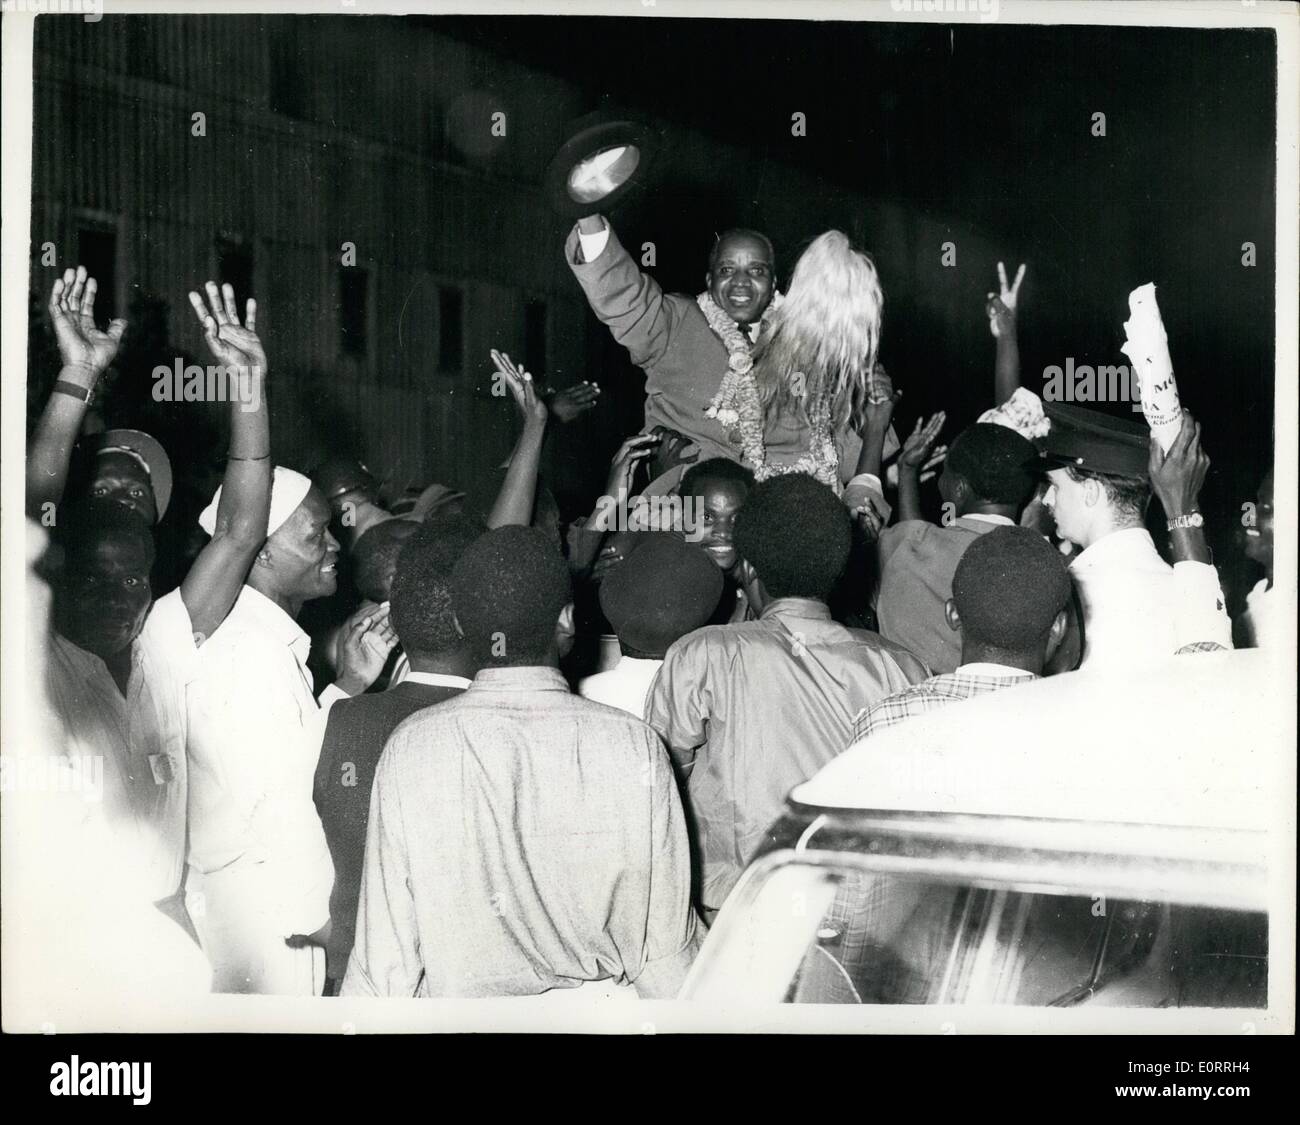 May 05, 1960 - Dr. Hasting Banda gets a great welcome on arrival in Mombasa: Dr. Hastings Banda the Nyassaland Leader gets a rousing reception from Lenya African Nationalists at the part of Mombasa... He waves a tribal fly-whisk at the crowd - while wearing a garland which was placed on his Nairobi. Stock Photo